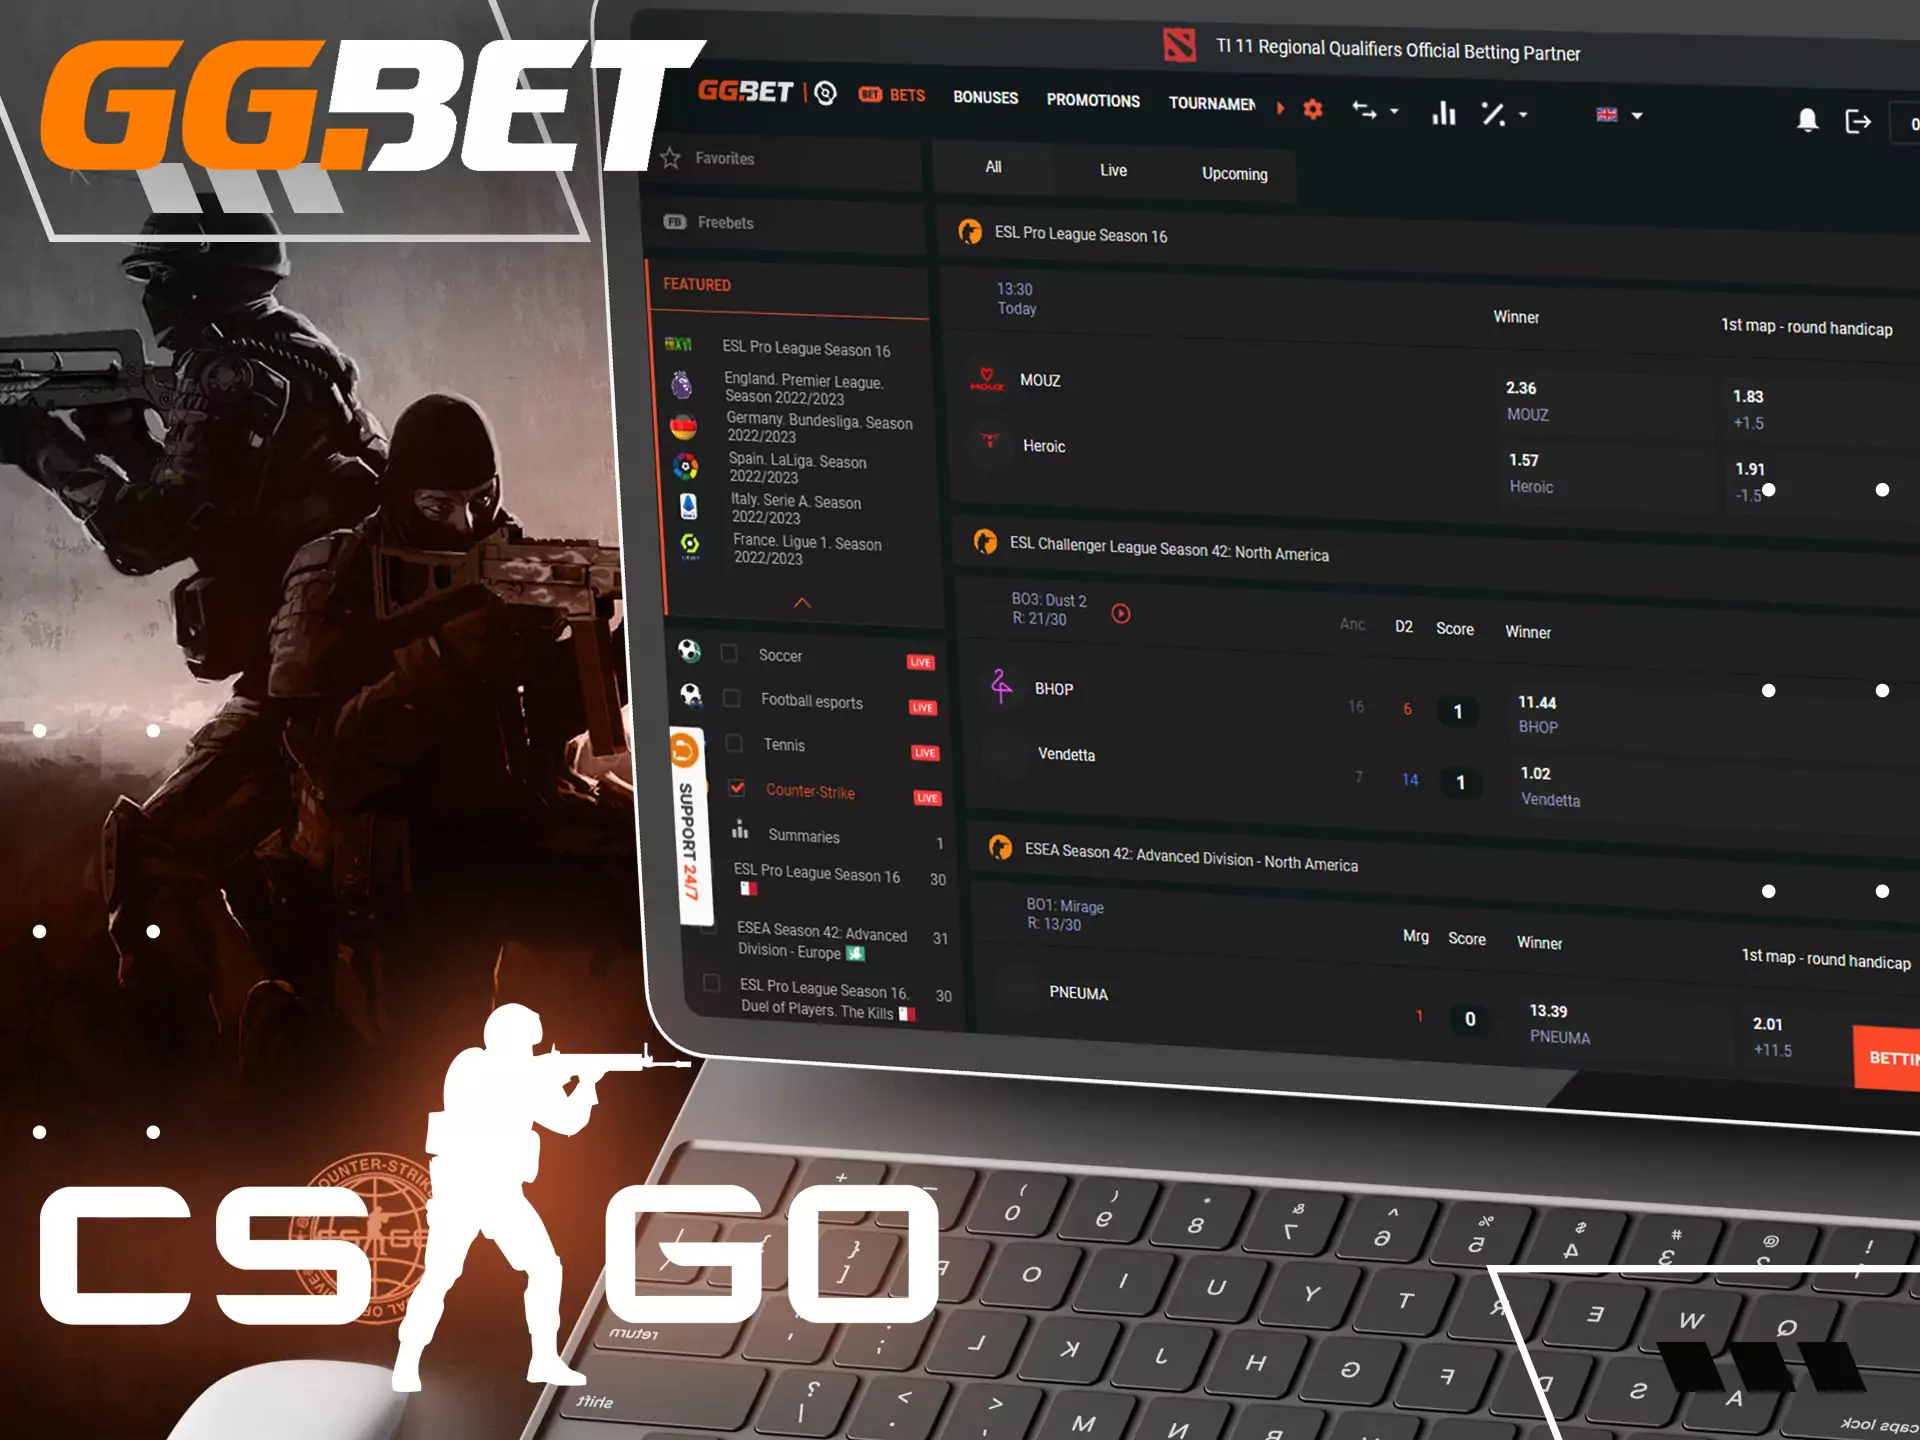 Betting on esports events at GGBet includes CS:GO matches as well.